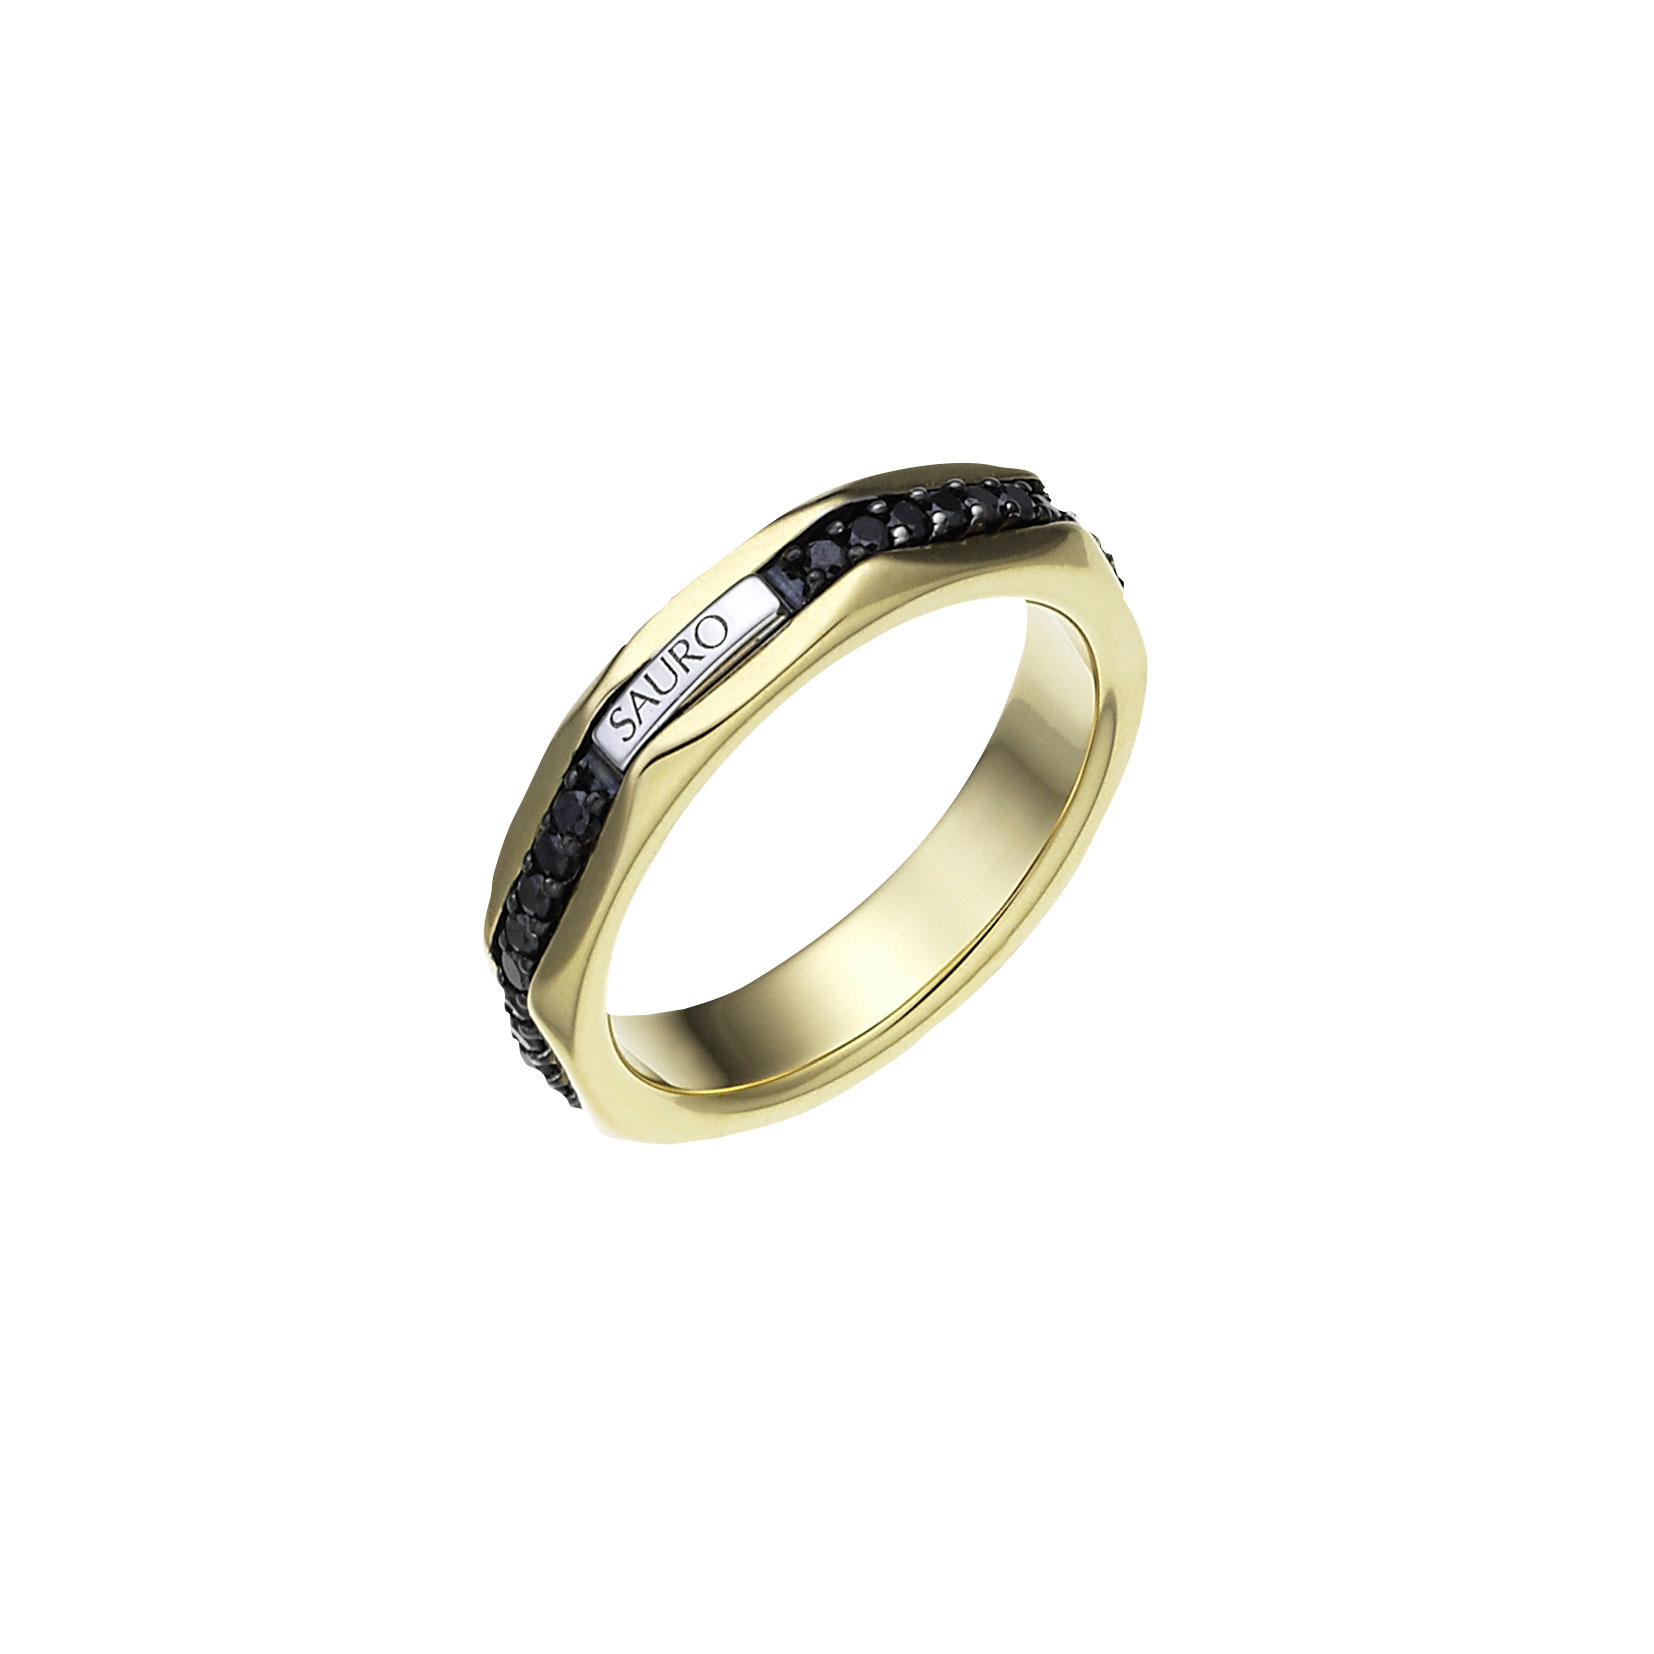 Ross Gold Band For Men | A Sturdy Gold Band For Her | CaratLane